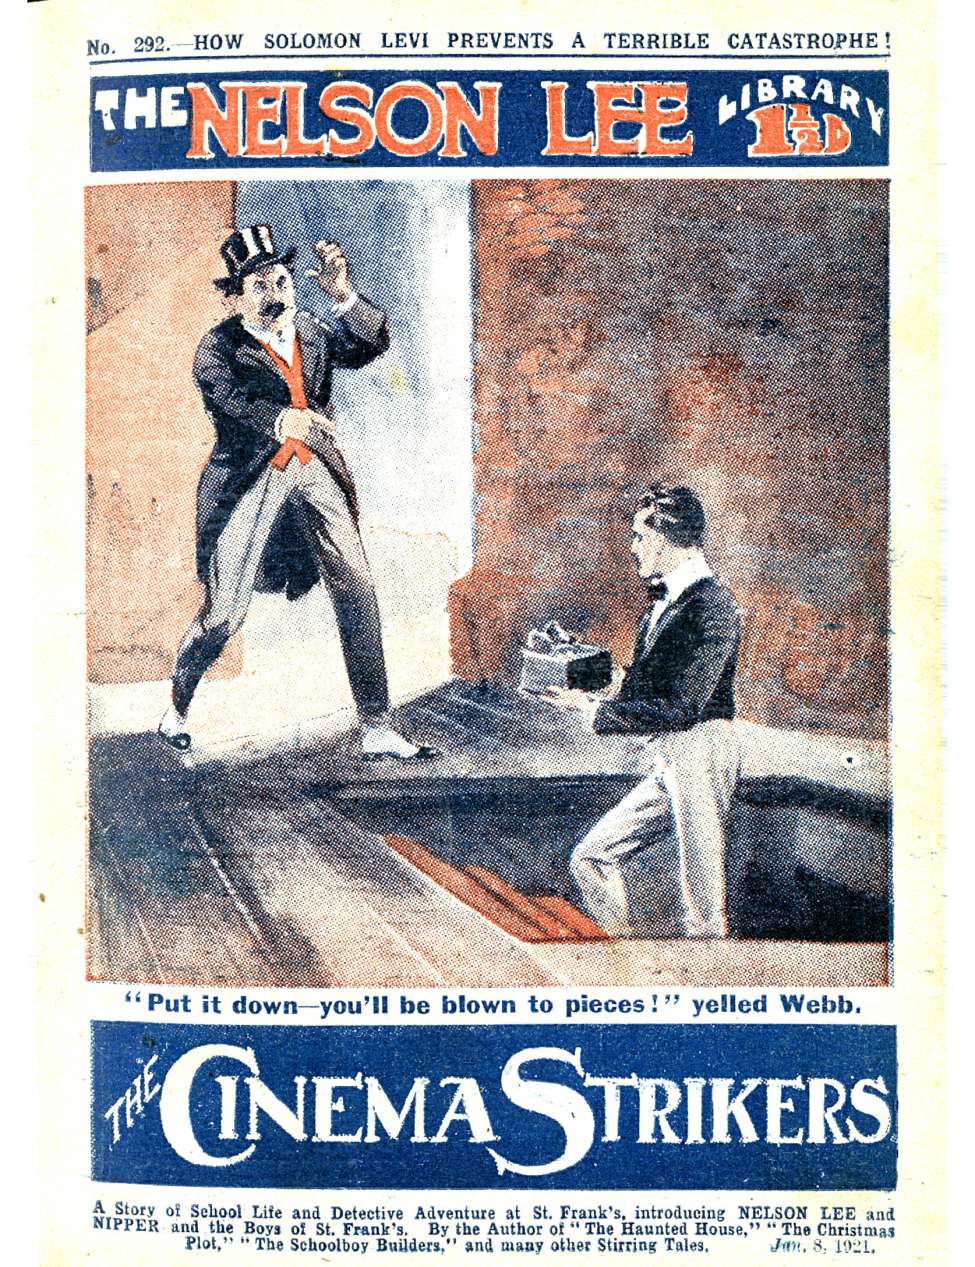 Comic Book Cover For Nelson Lee Library s1 292 - The Cinema Strikers